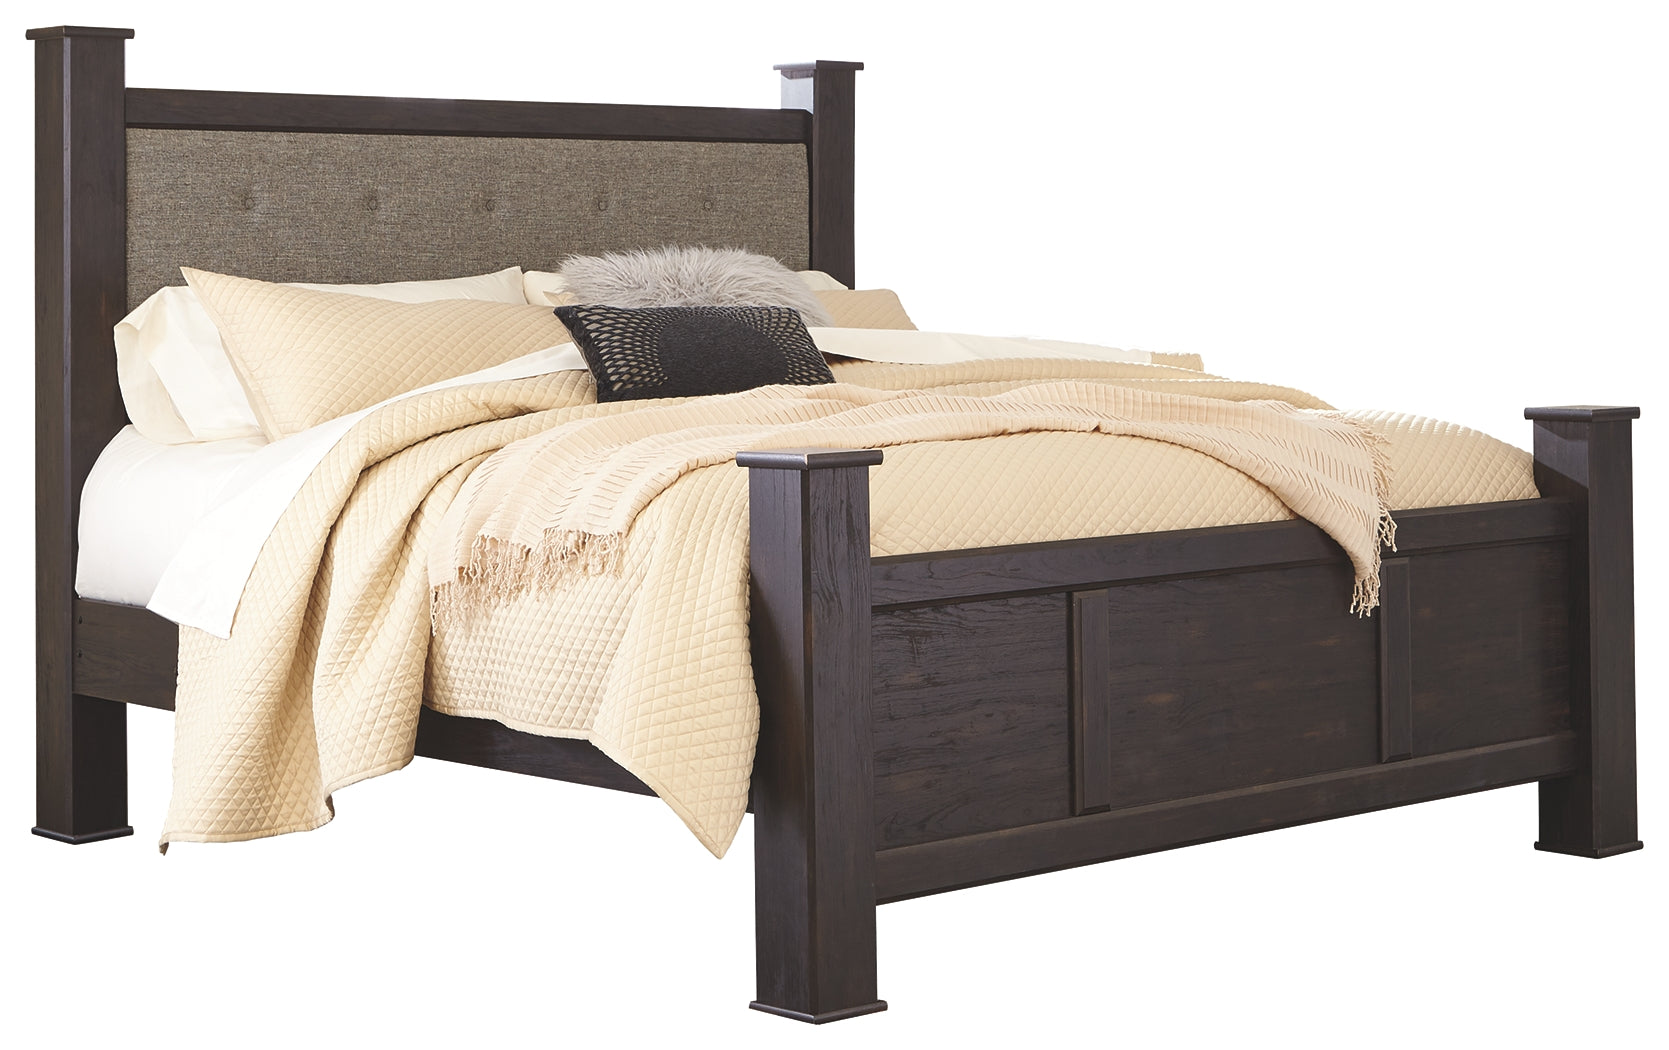 Signature Design by Ashley Reylow King Poster Bed